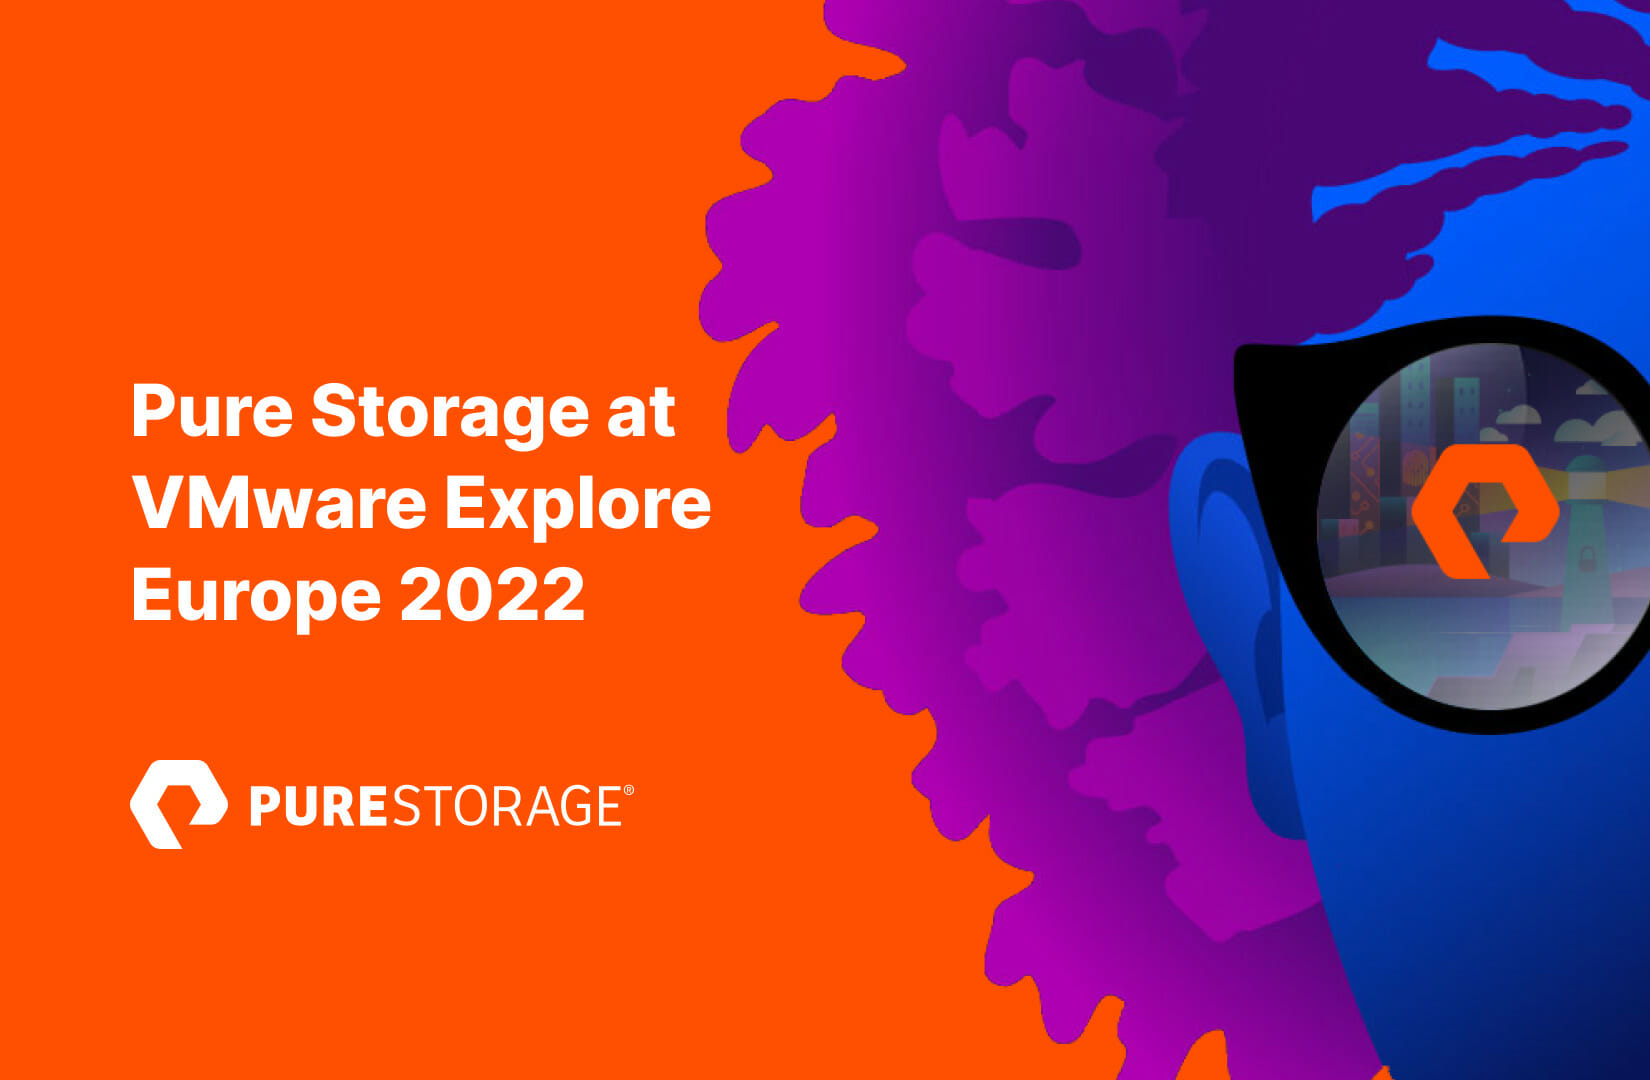 Stretched Storage Support with vVols at VMware Explore Europe